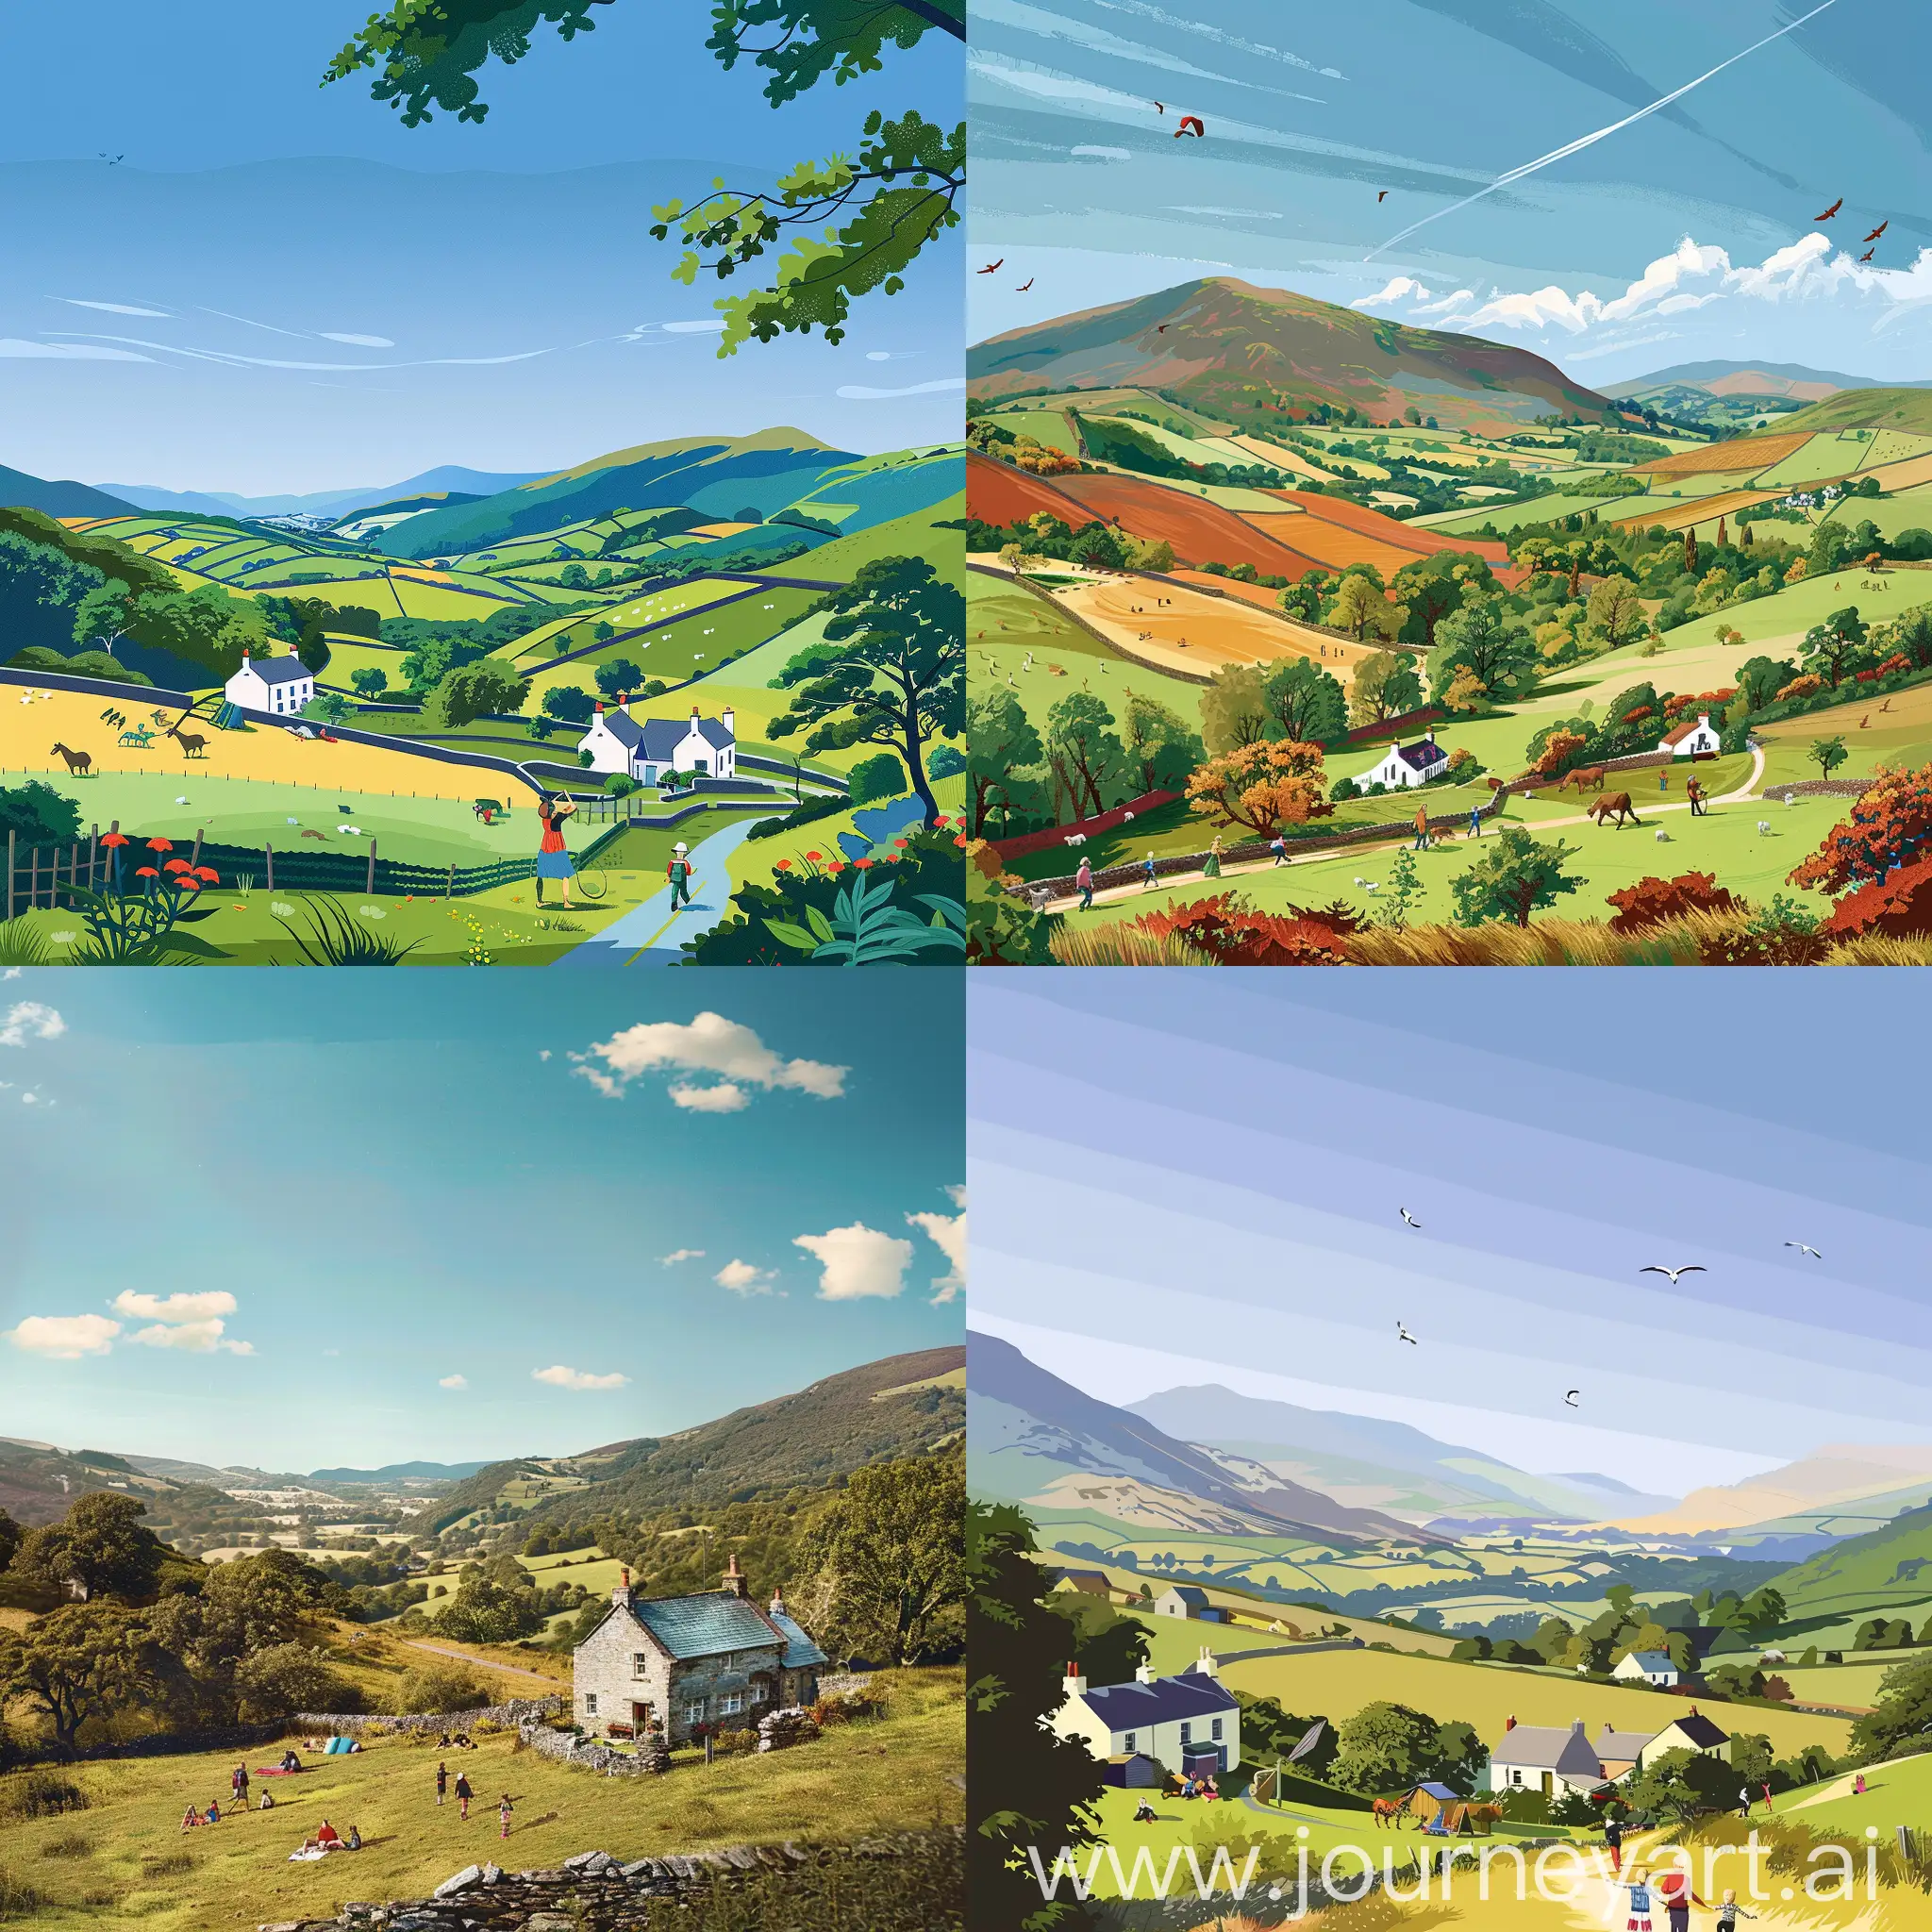 Generate an image of a picturesque Welsh landscape with rolling hills, a clear blue sky, and a family enjoying outdoor activities